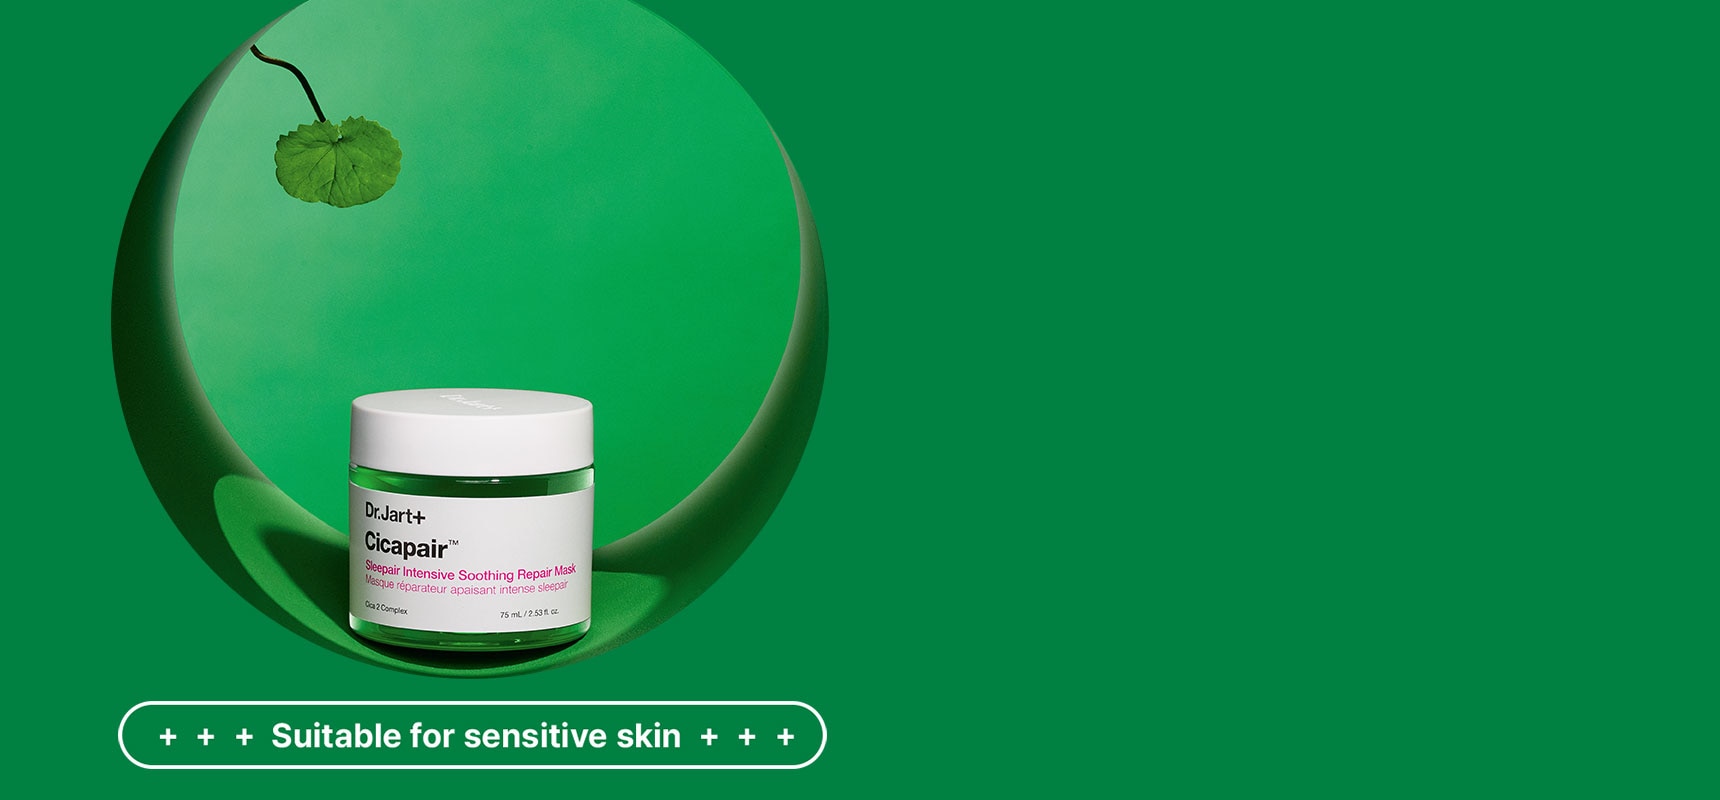 Suitable for sensitive skin